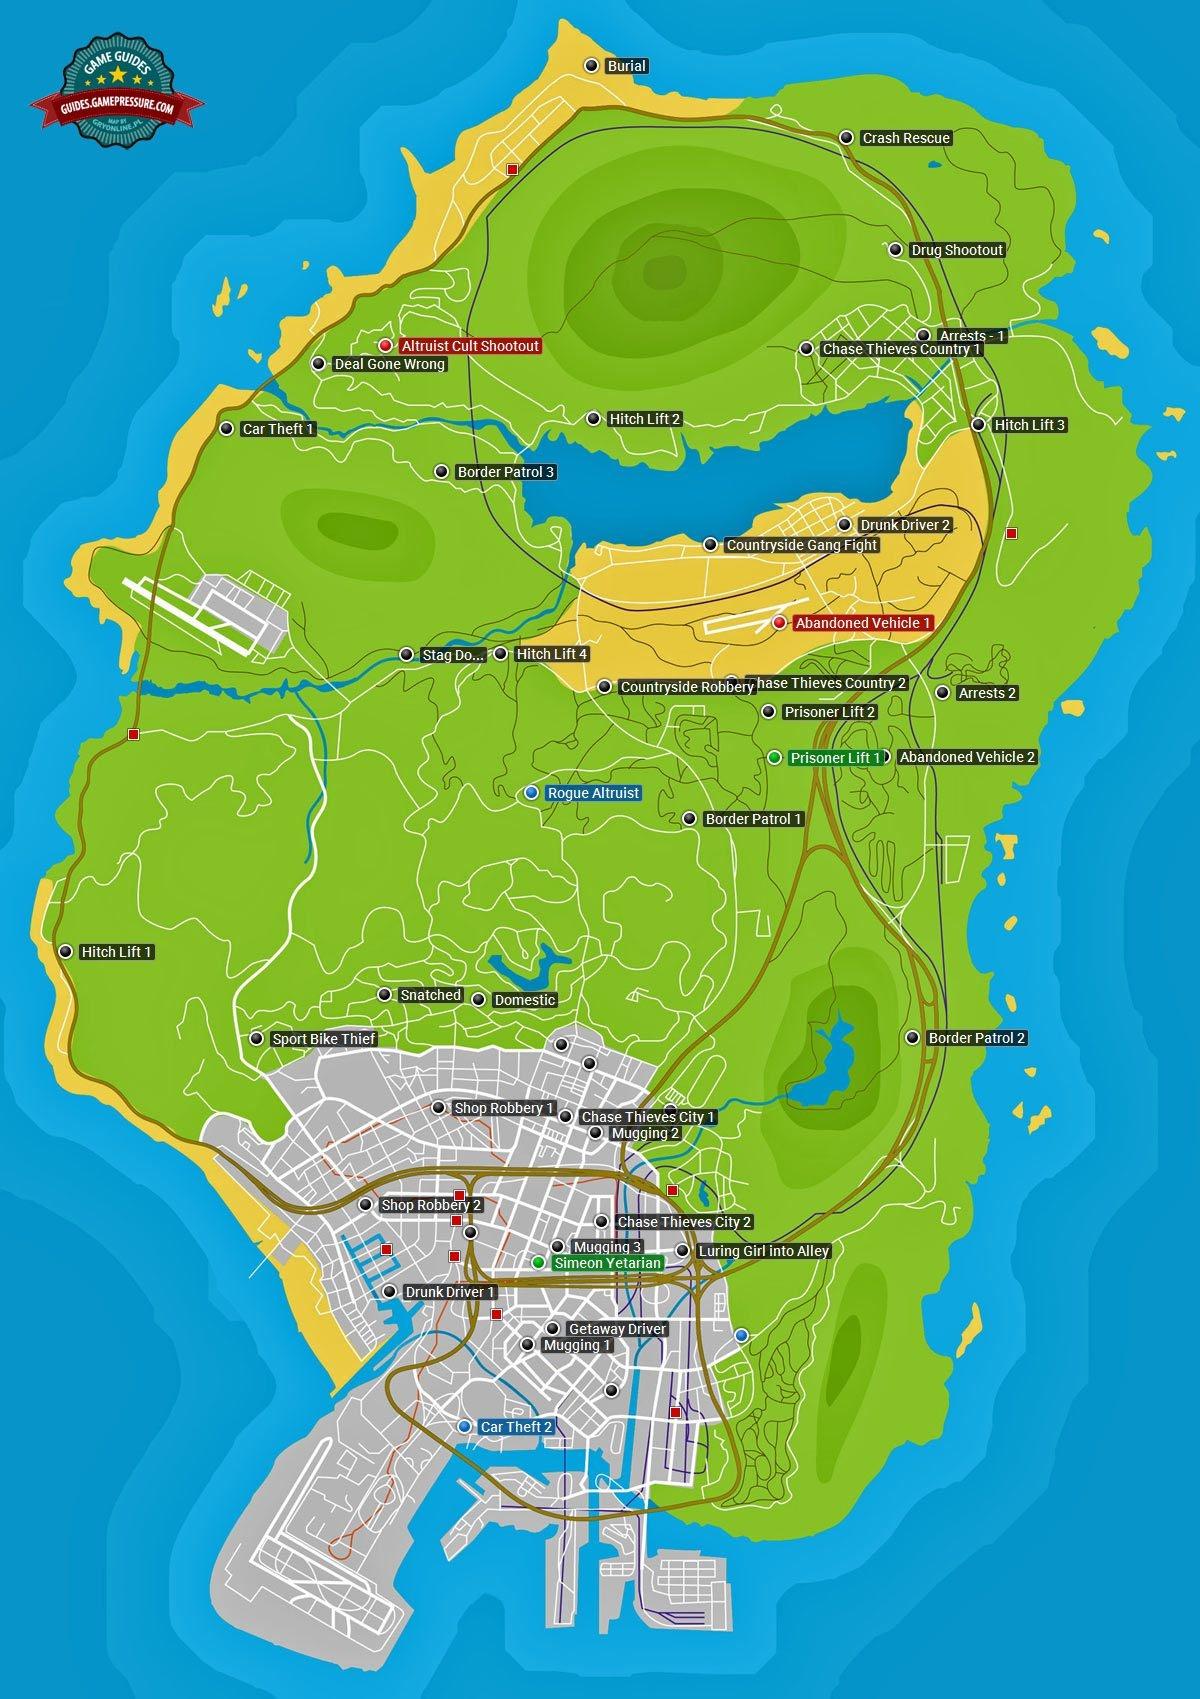 What is director mode in GTA 5? Step-by-step guide